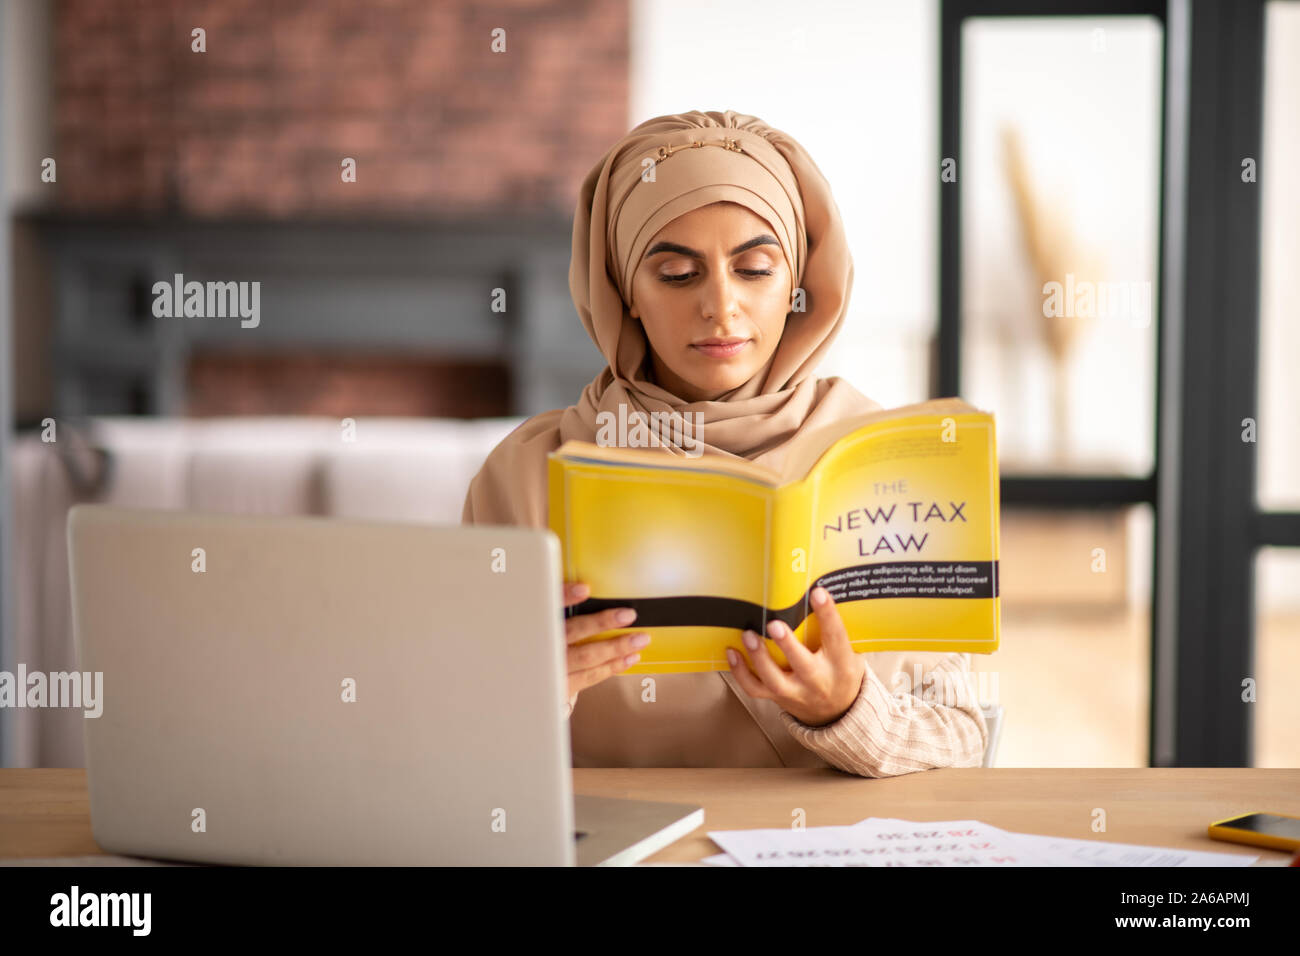 Beautiful Muslim girl reading a book about tax law Stock Photo